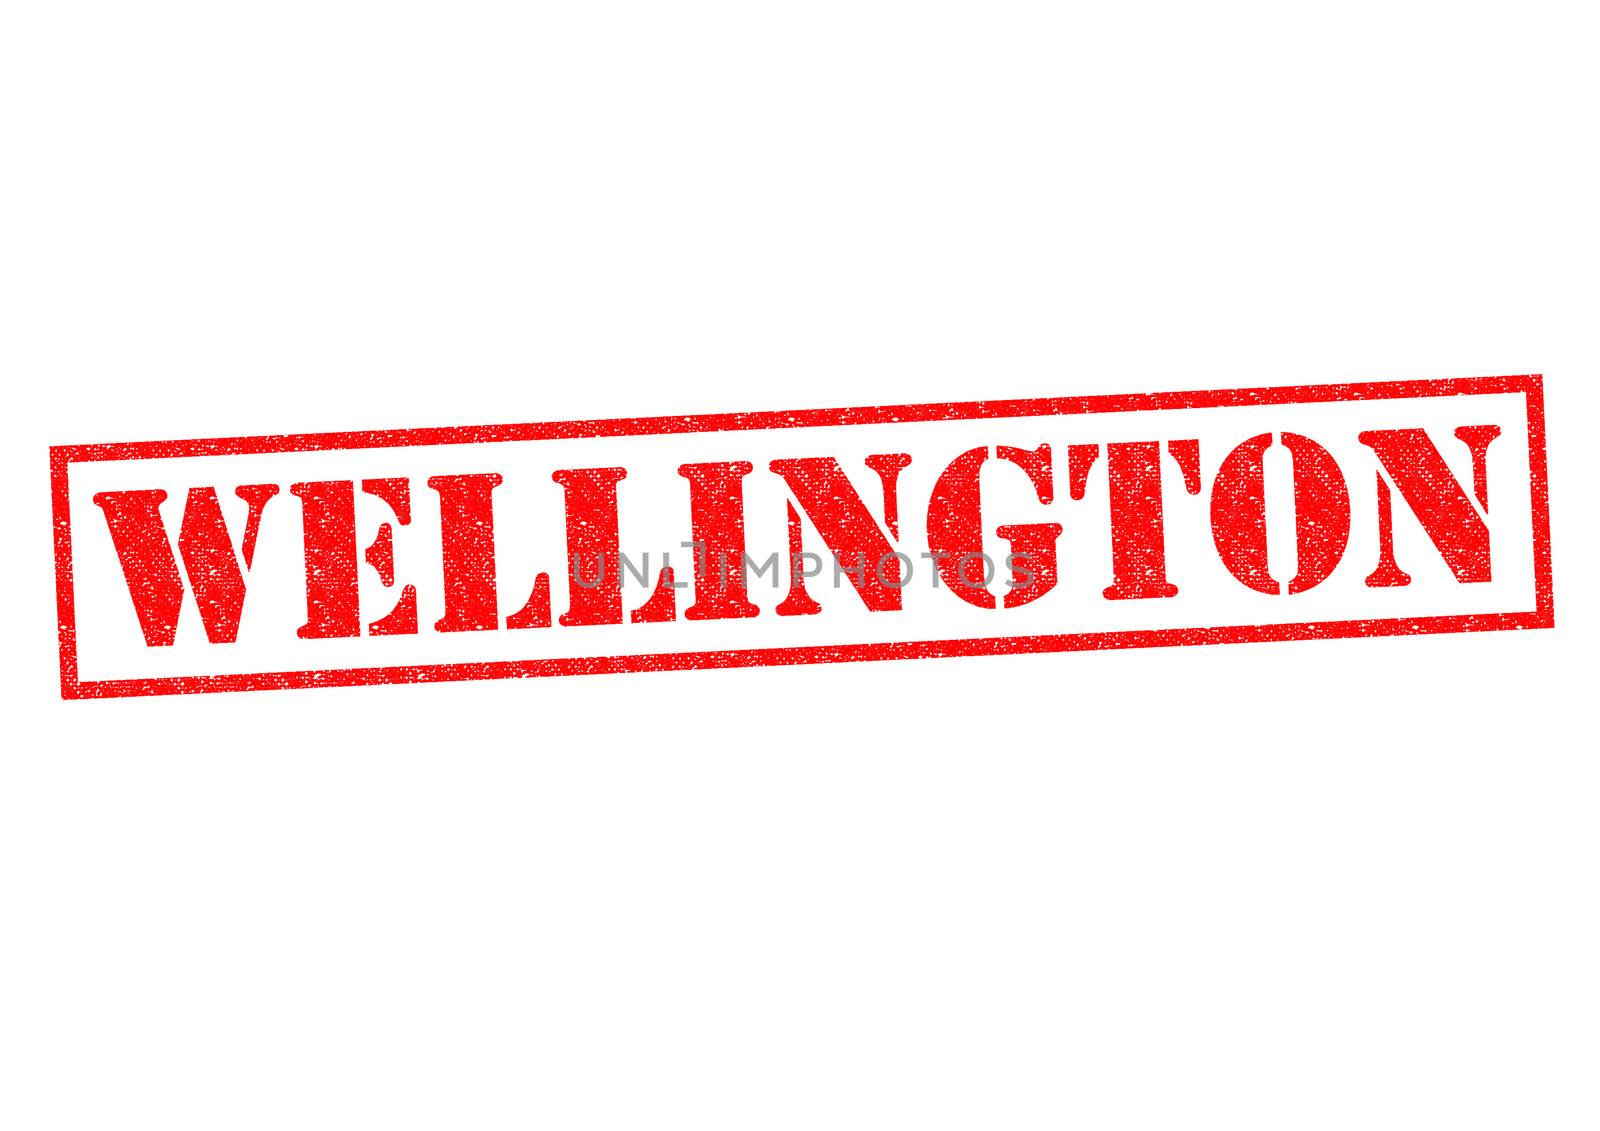 WELLINGTON Rubber Stamp over a white background.